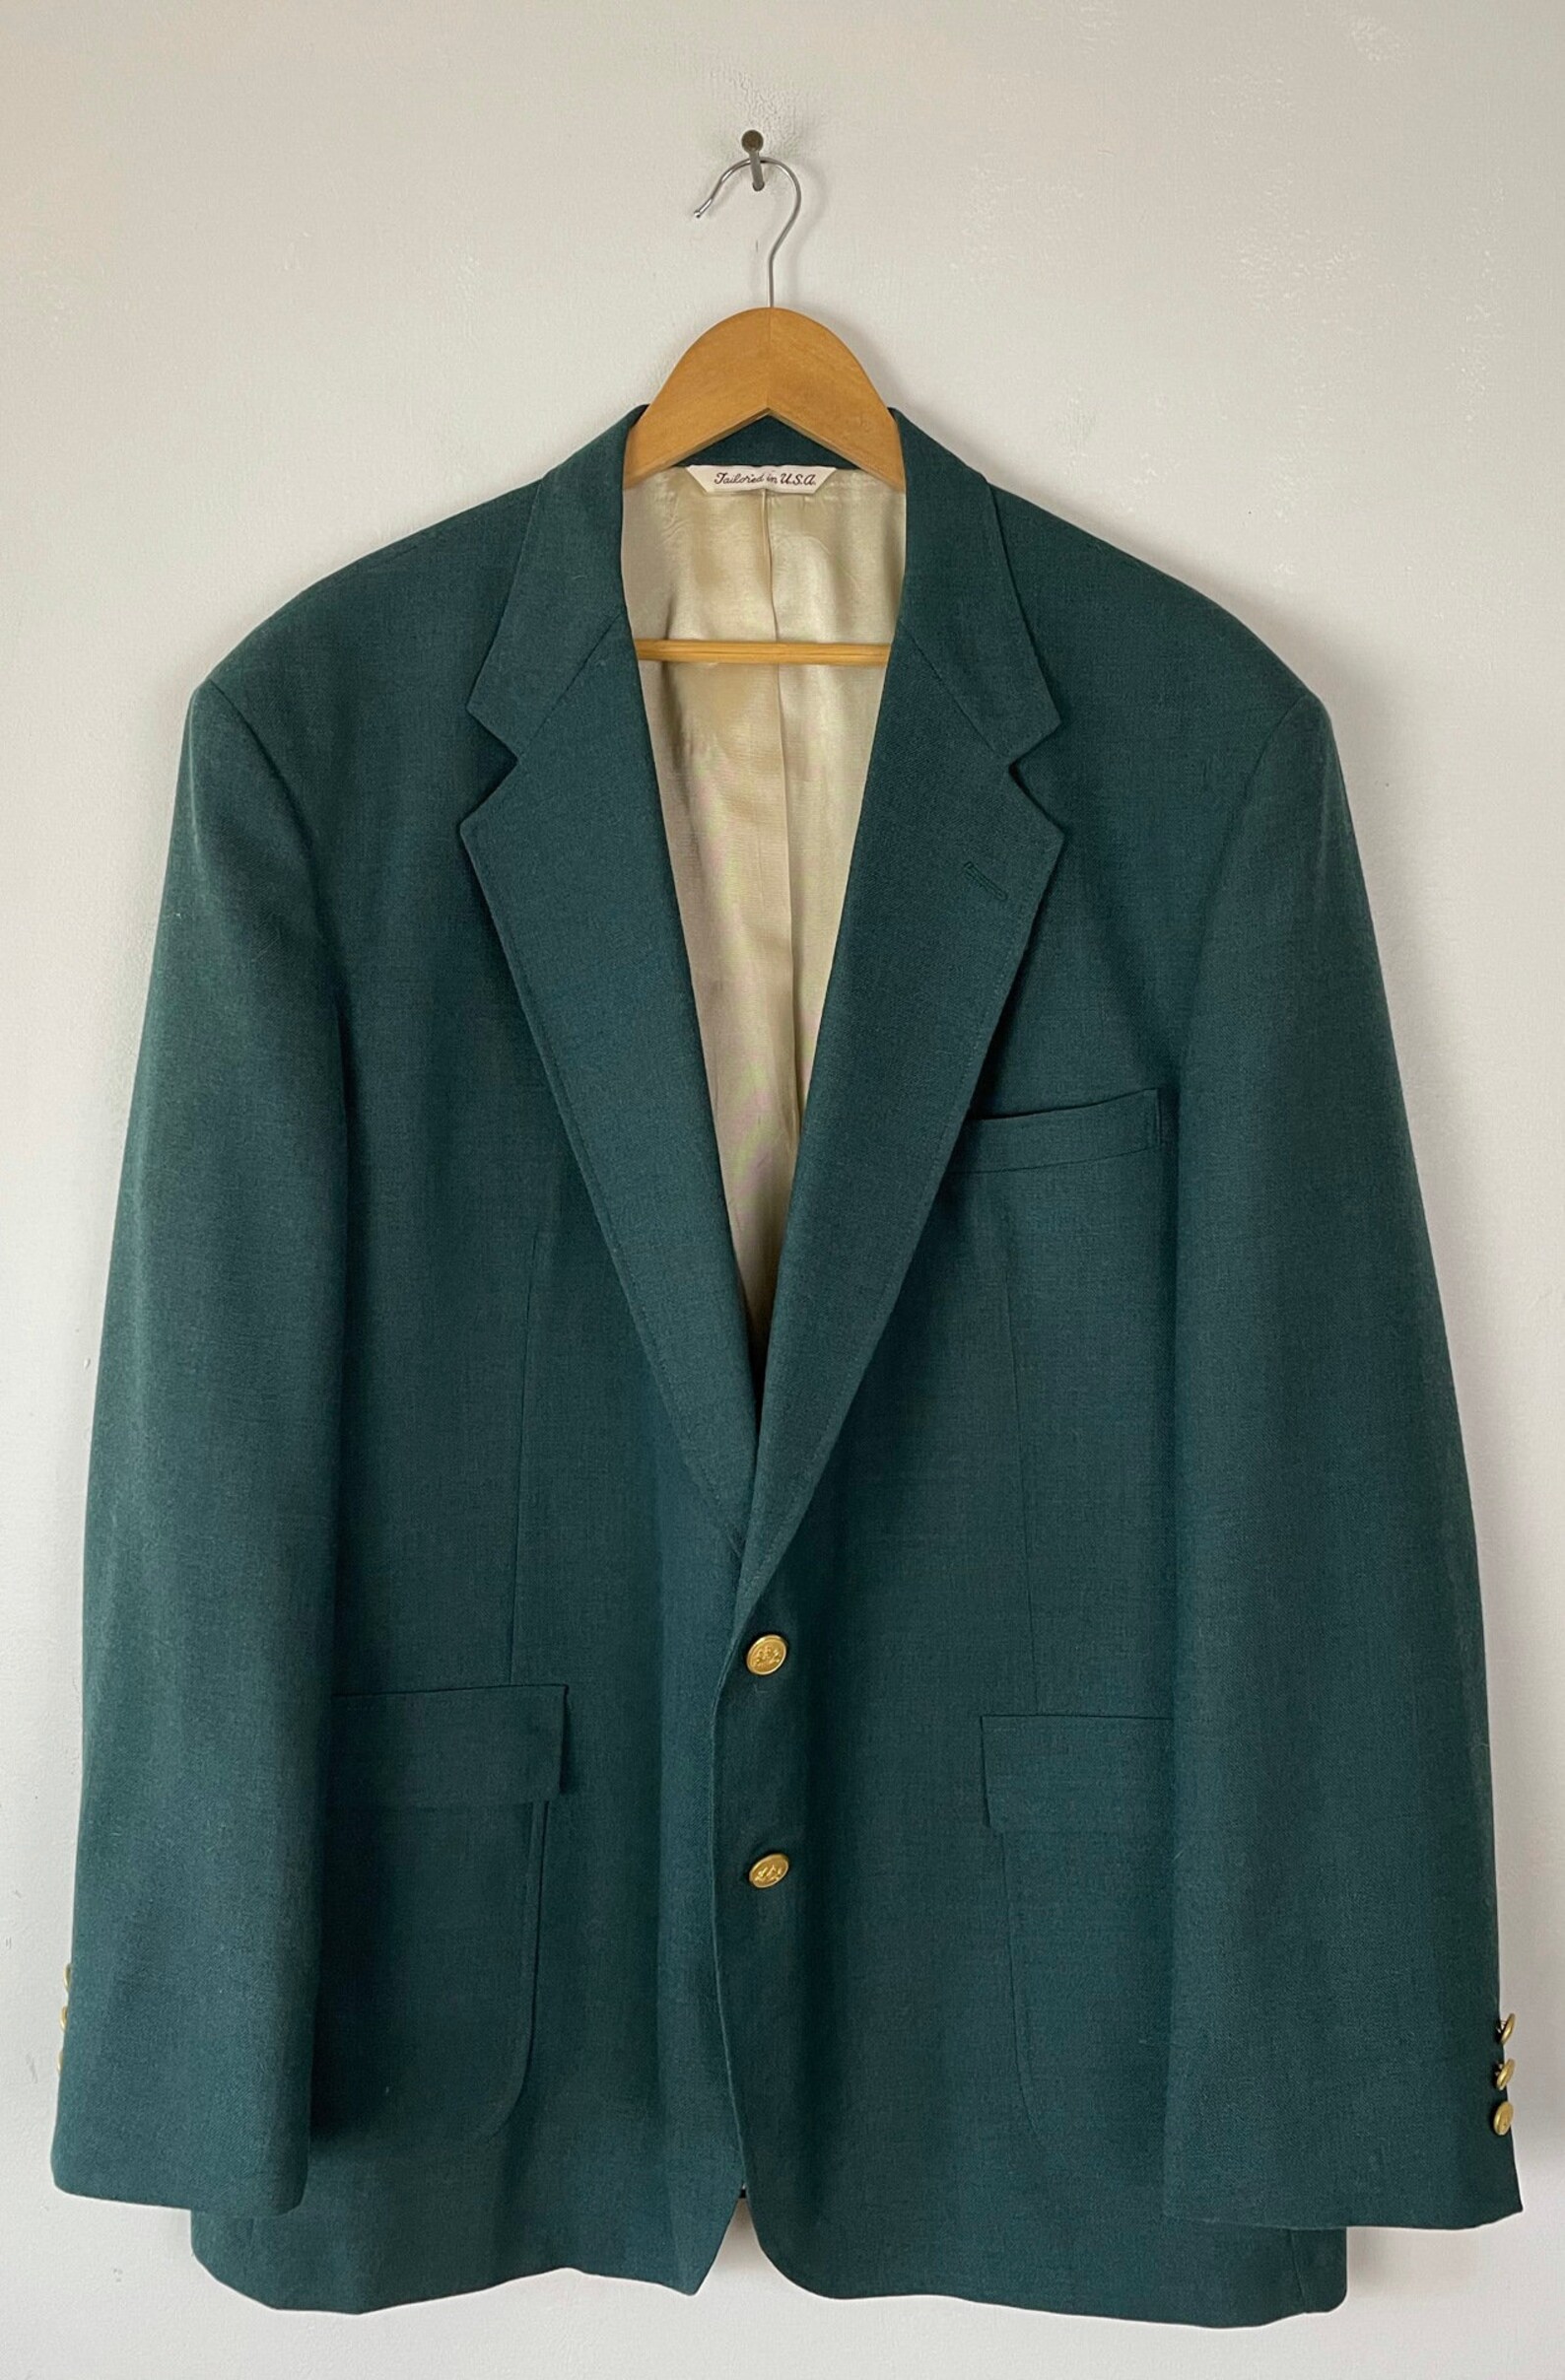 Vintage Dark Green Sport Coat with Gold Button Mens Size 50L | Etsy